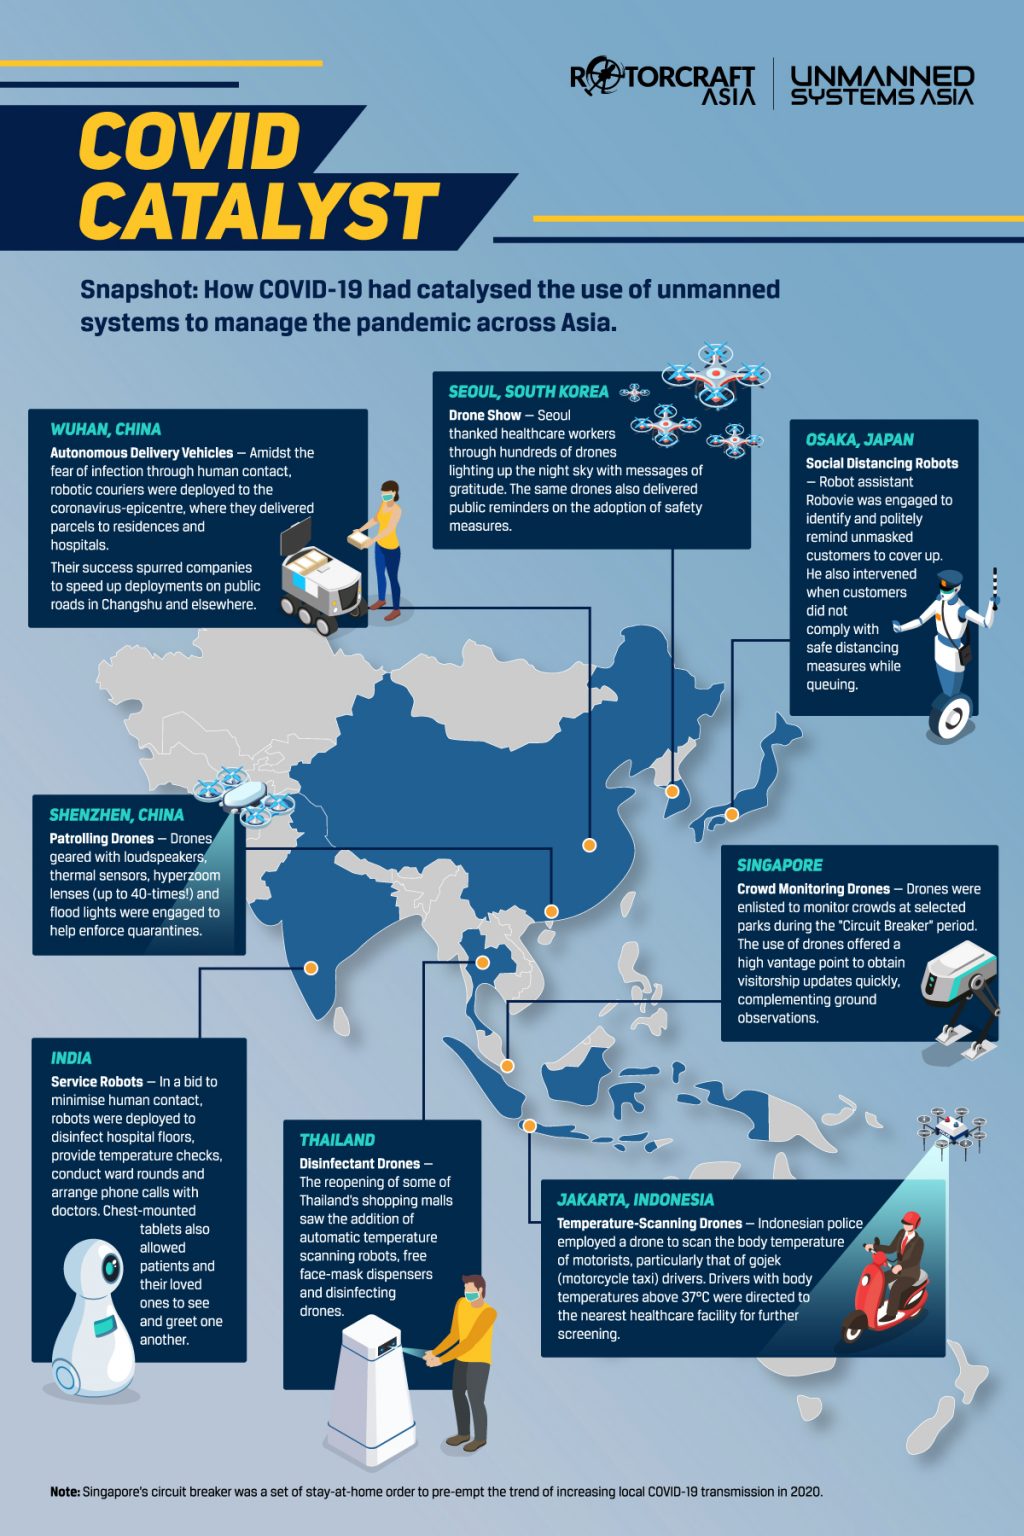 How COVID-10 catalysed the use of unmanned systems to manage the pandemic across Asia.